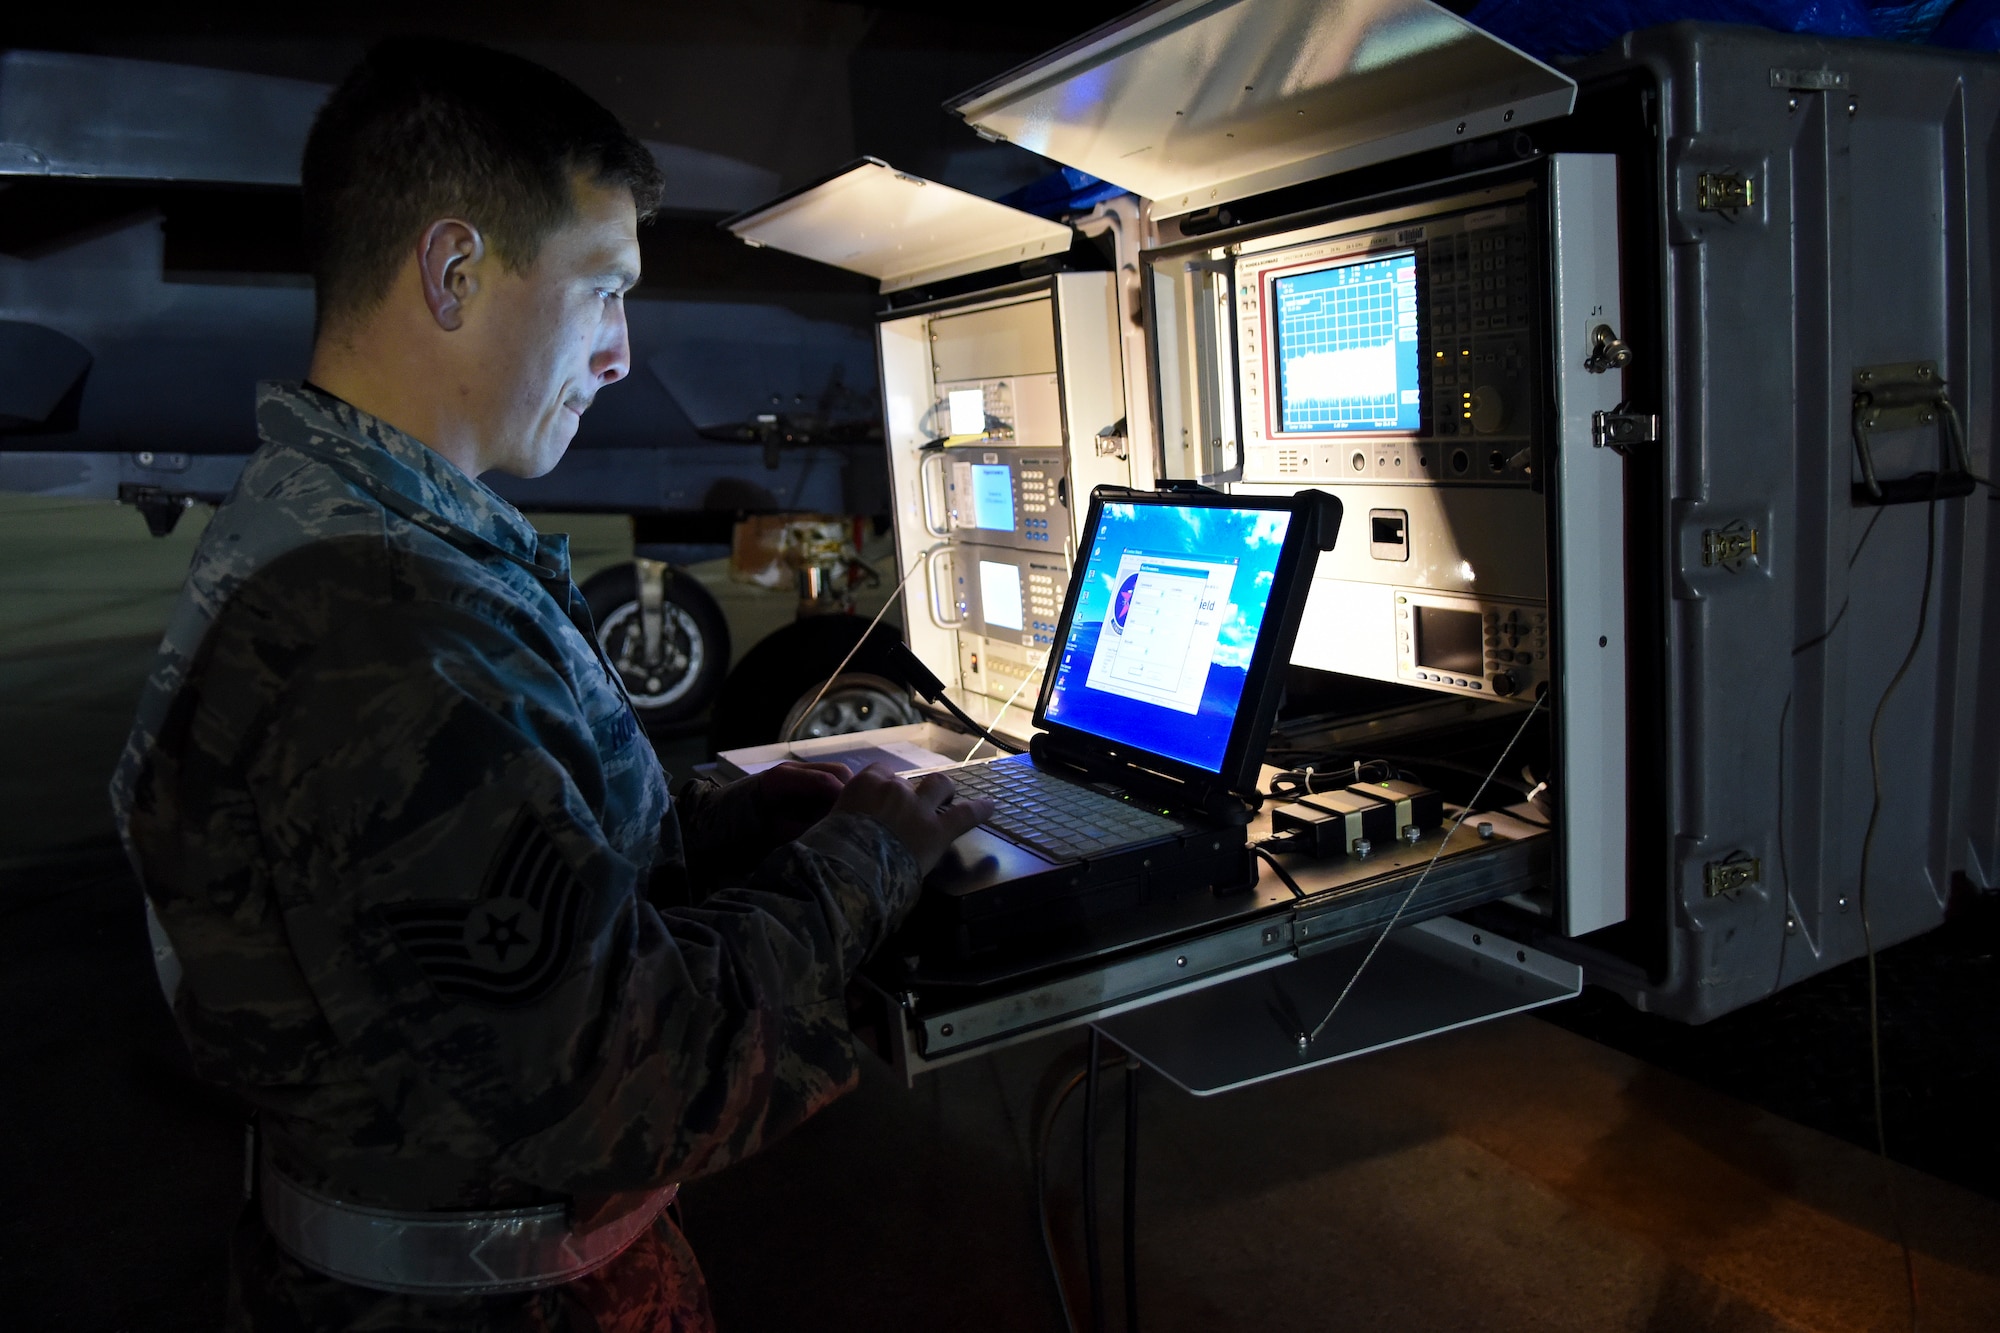 Tech. Sgt. Matthew Hoover, a Combat Shield crew leader assigned to the 16th Electronic Warfare Squadron, Eglin Air Force Base, Florida, monitors a USM-642 “Raven” signal generator during Combat Shield, Oct. 20, 2015, at Seymour Johnson Air Force Base, North Carolina. Hoover used the USM-642 to simulate real-world radar emissions and test the sensitivity of the threat detection systems of an F-15E Strike Eagle.
(U.S. Air Force photo/Senior Airman Aaron J. Jenne)
